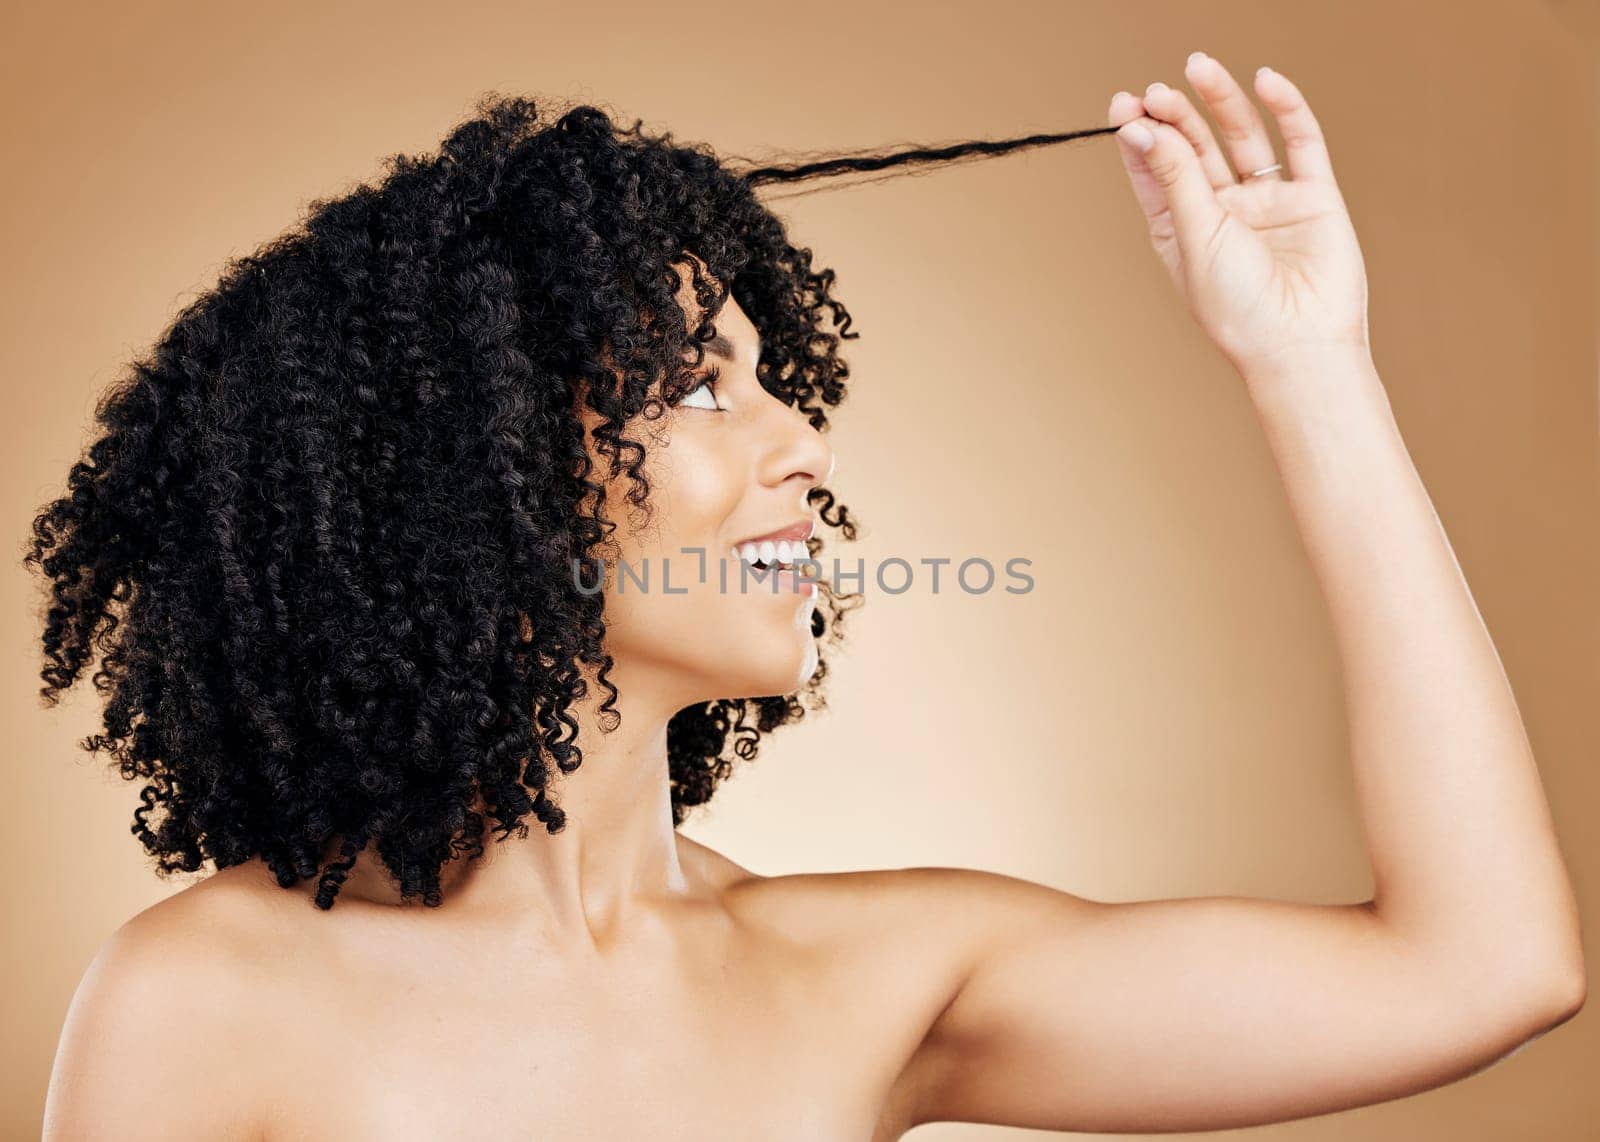 Hair, woman with curls and beauty, salon treatment for shine, cosmetic care and smile on studio background. Wellness, haircare and model with strong texture and curly hairstyle, volume and afro.